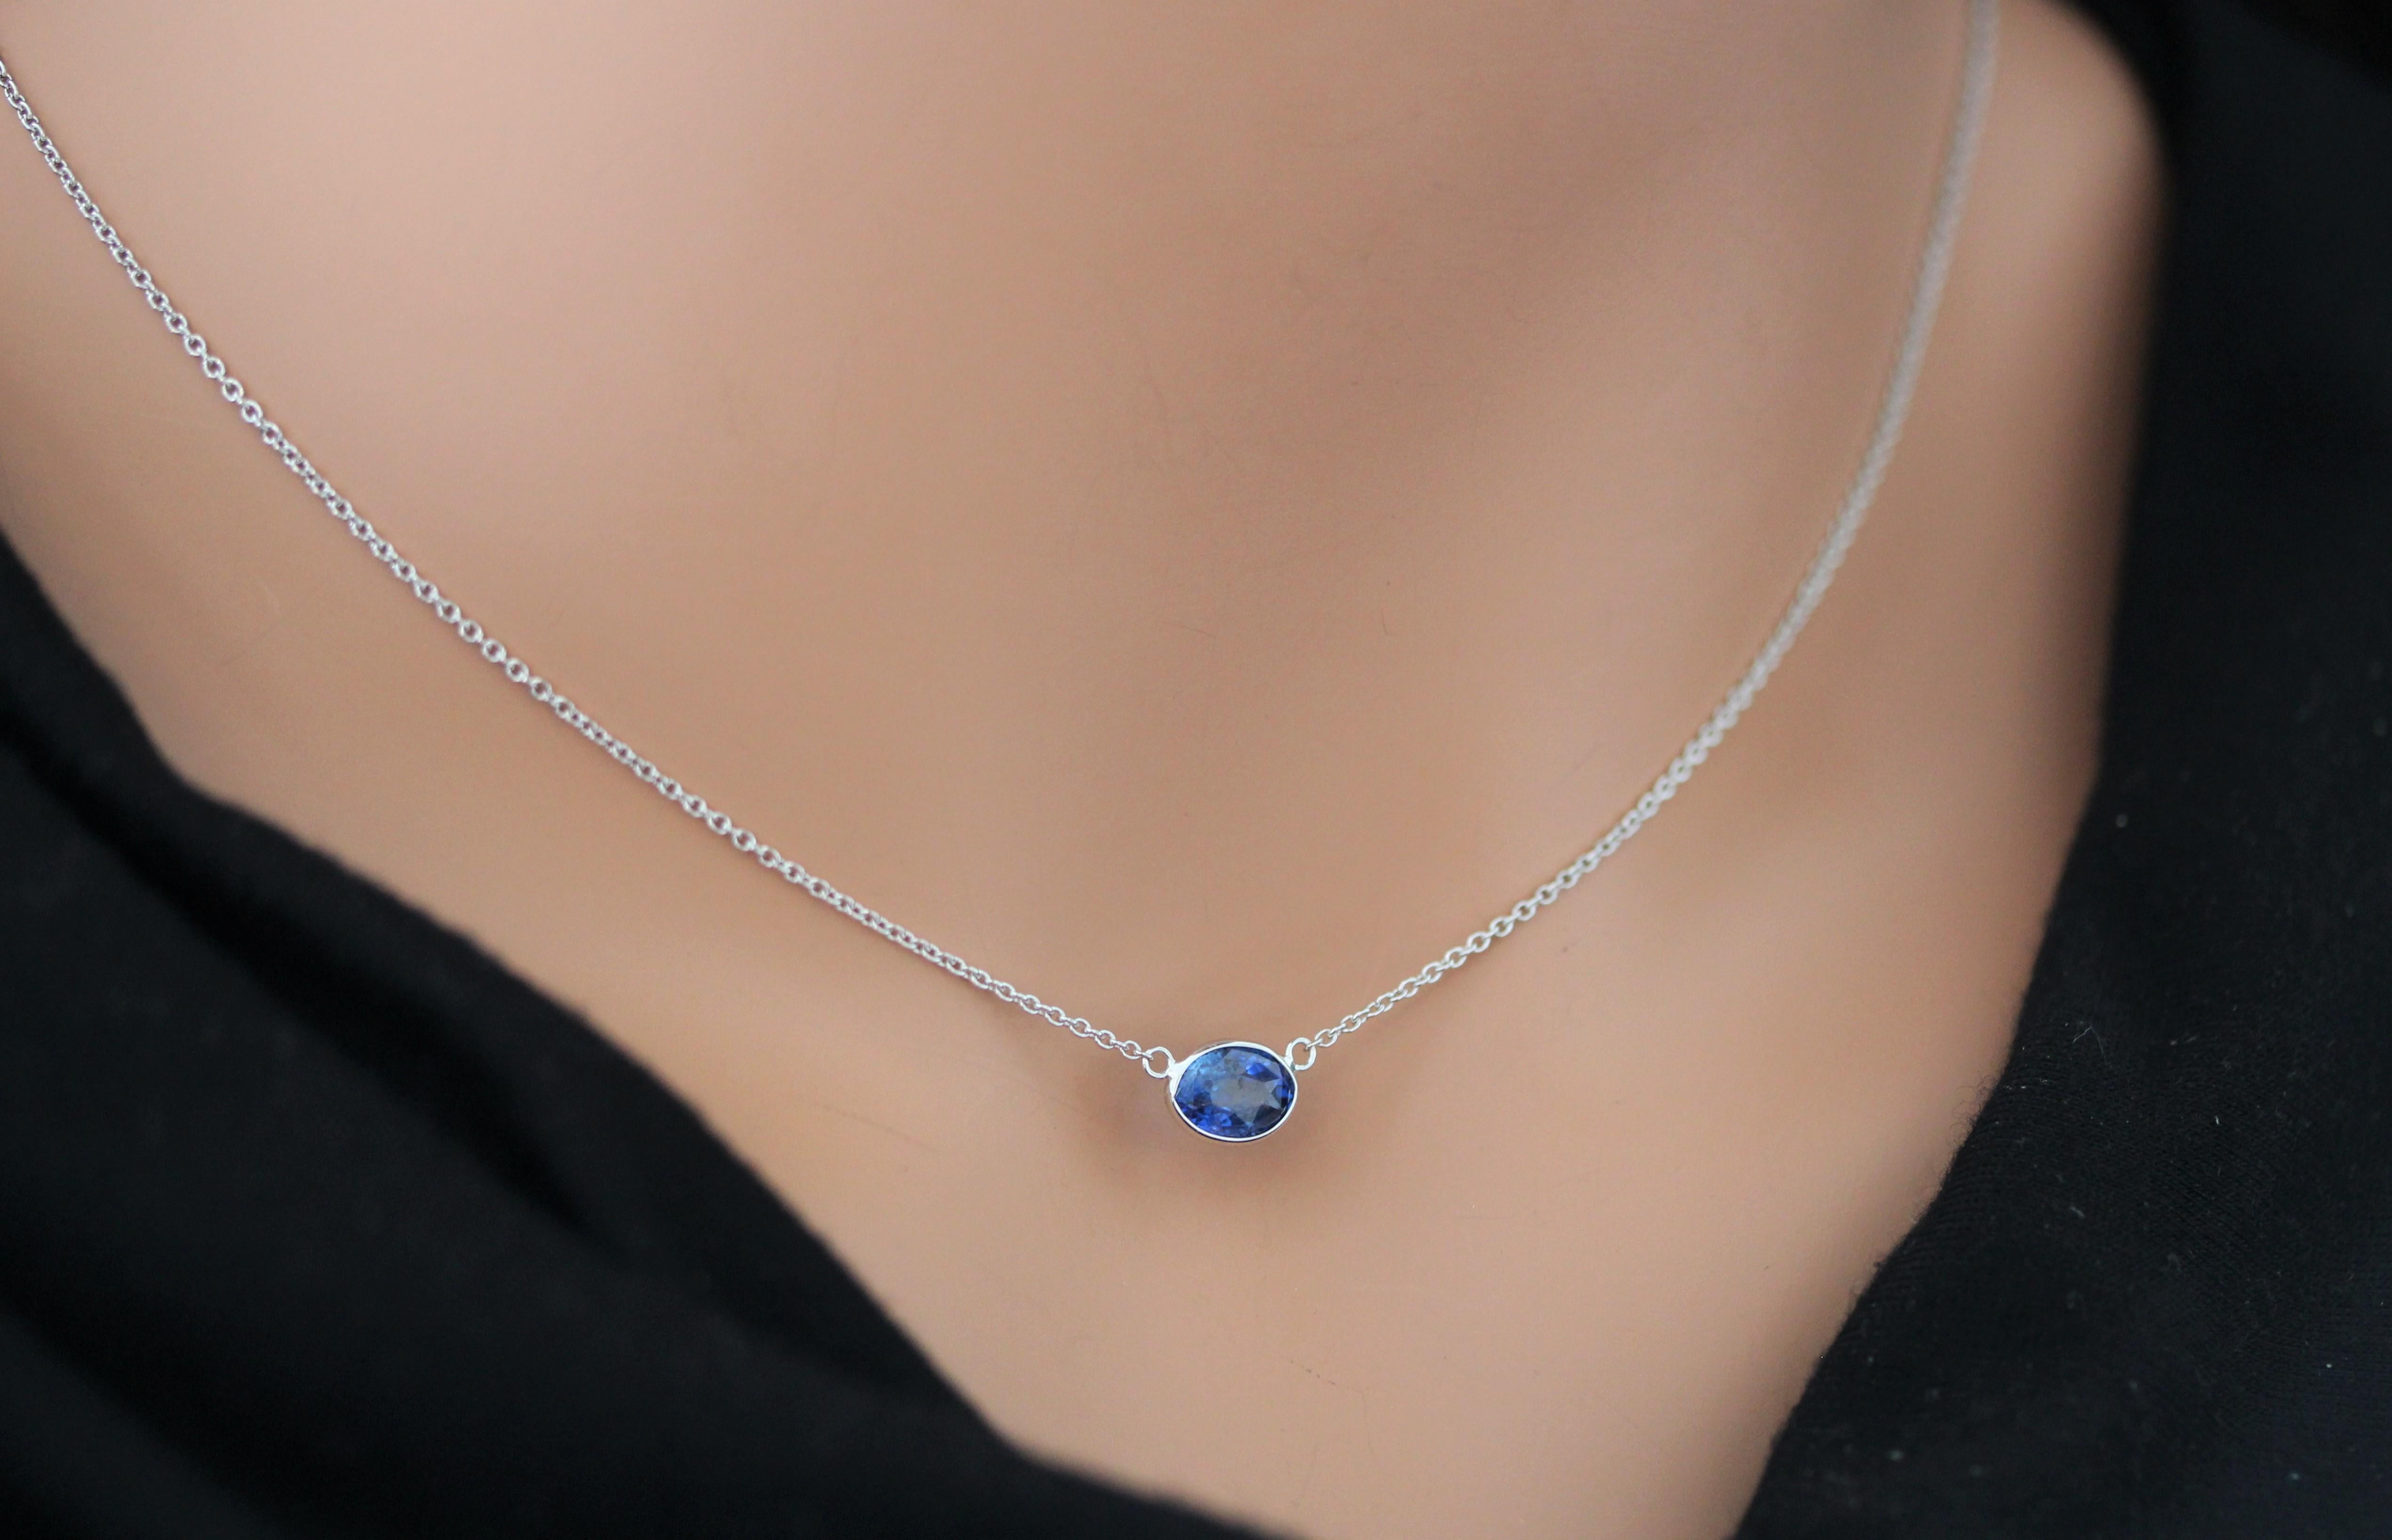 Oval Cut 1.58 Carat Oval Sapphire Blue Fashion Necklaces In 14k White Gold For Sale